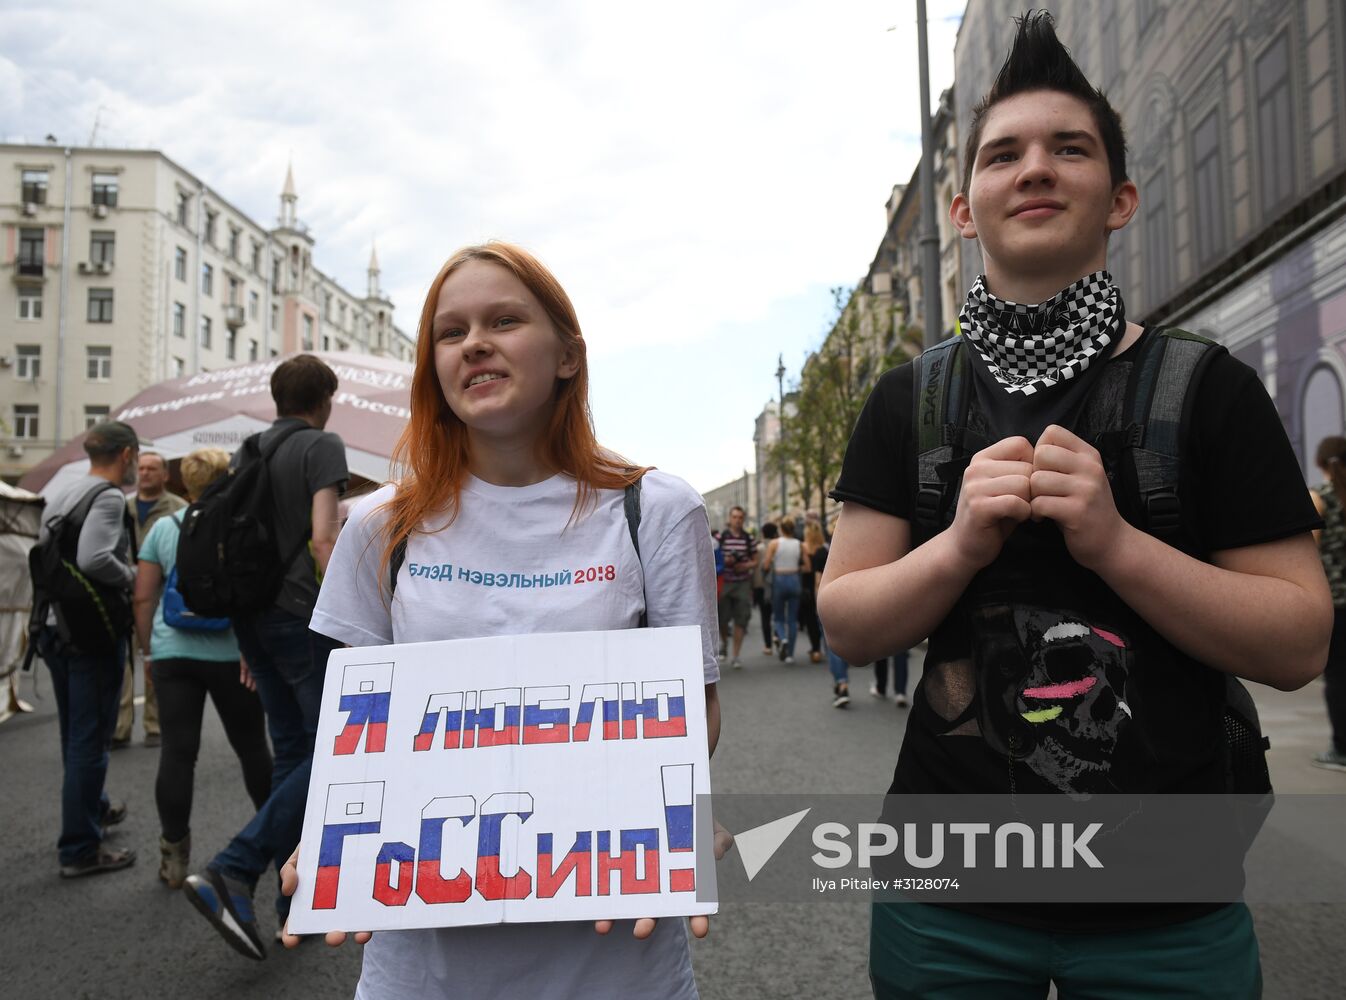 Unauthorized rally in Moscow